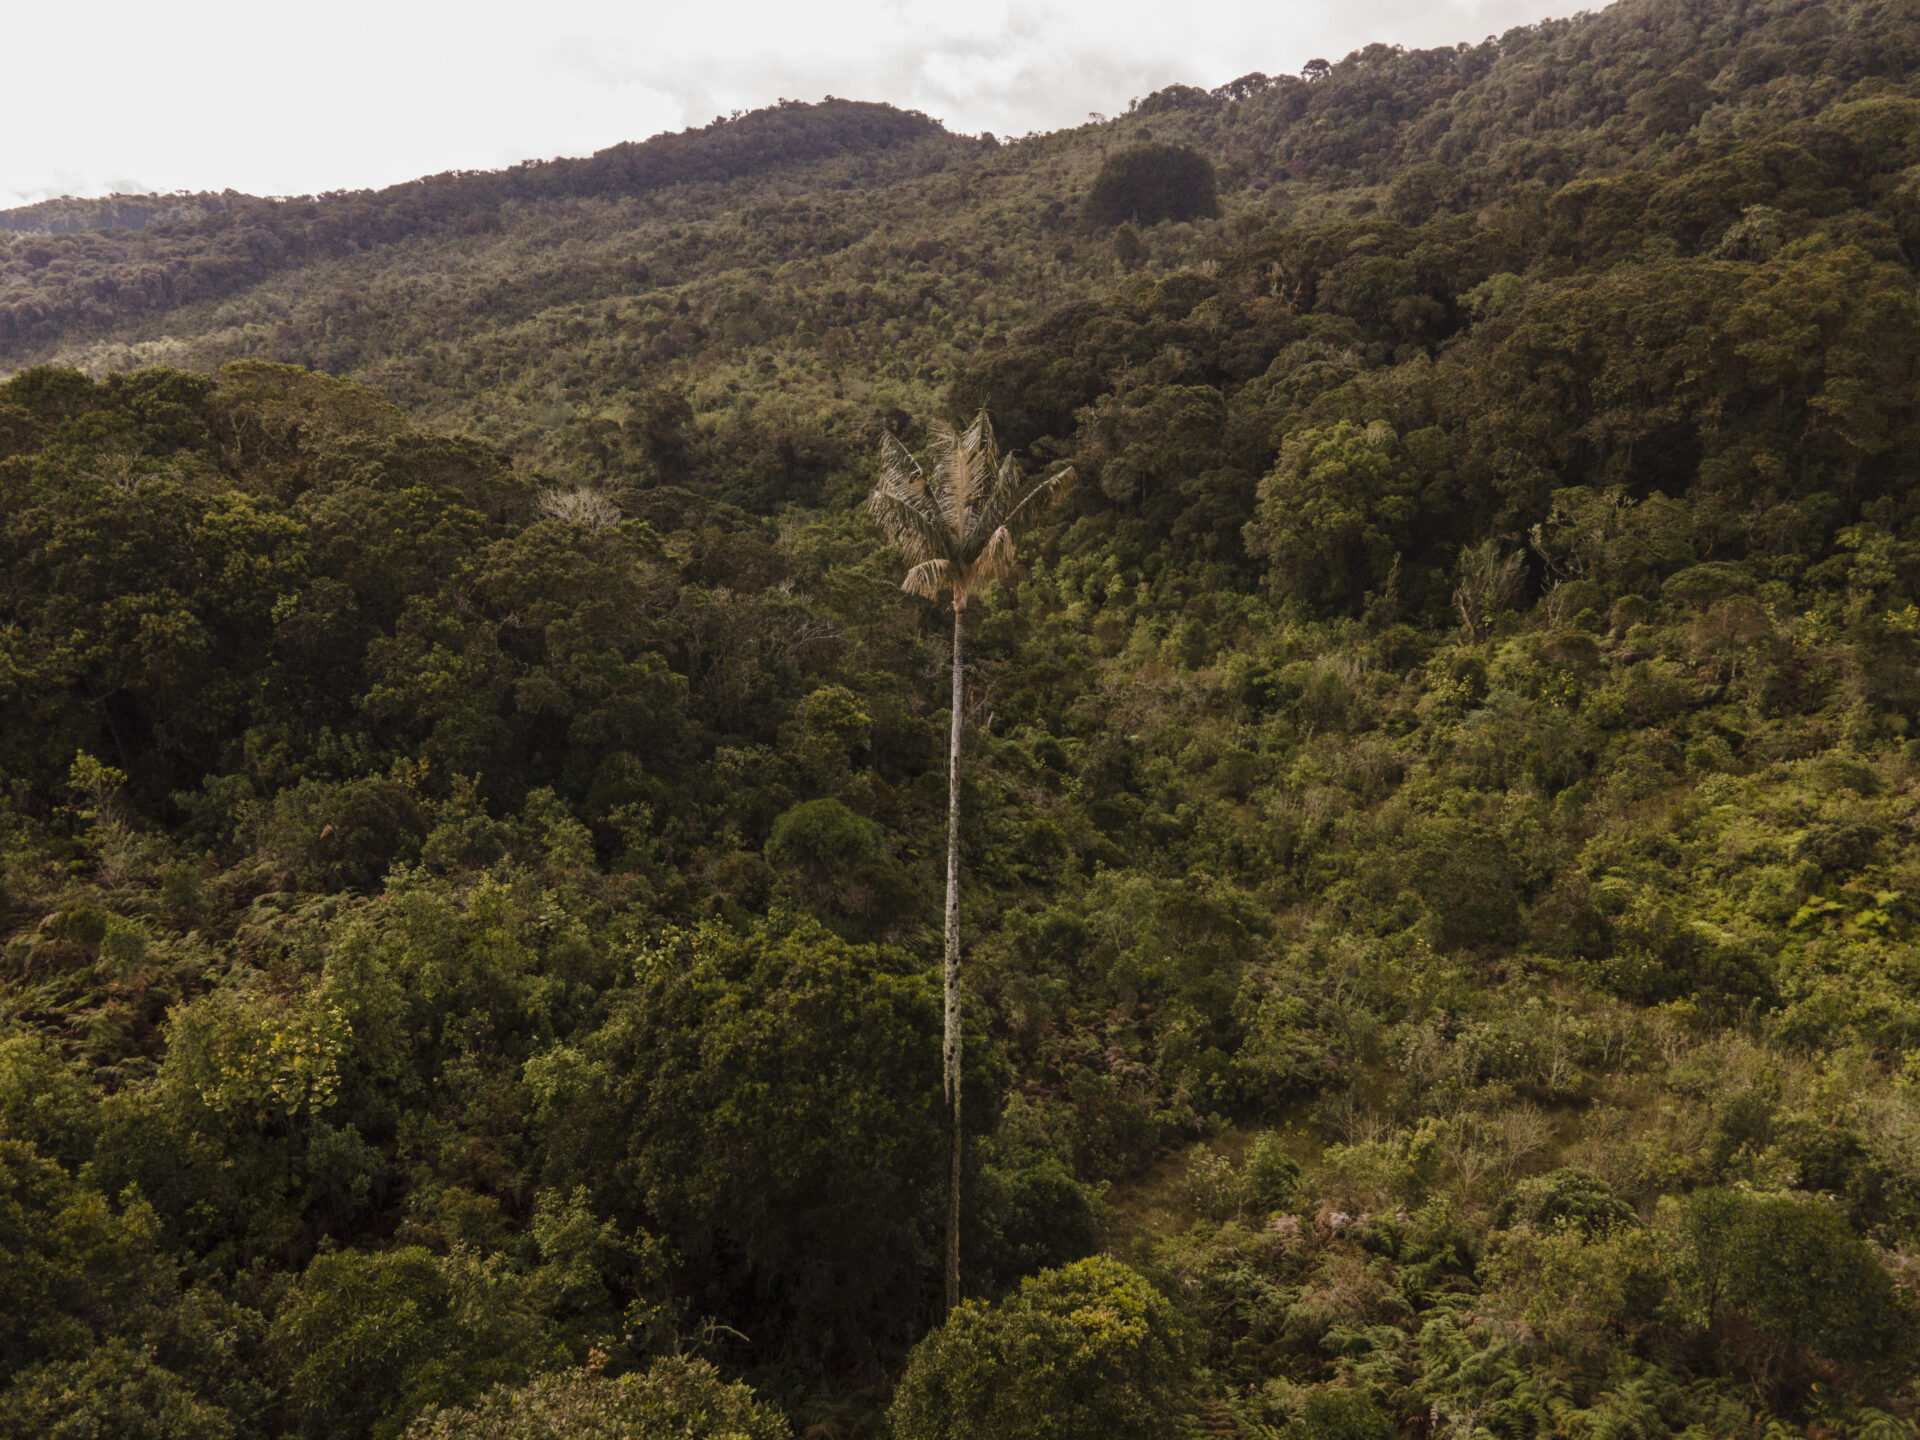 A Quindio Wax Palm amongst the cloud forest